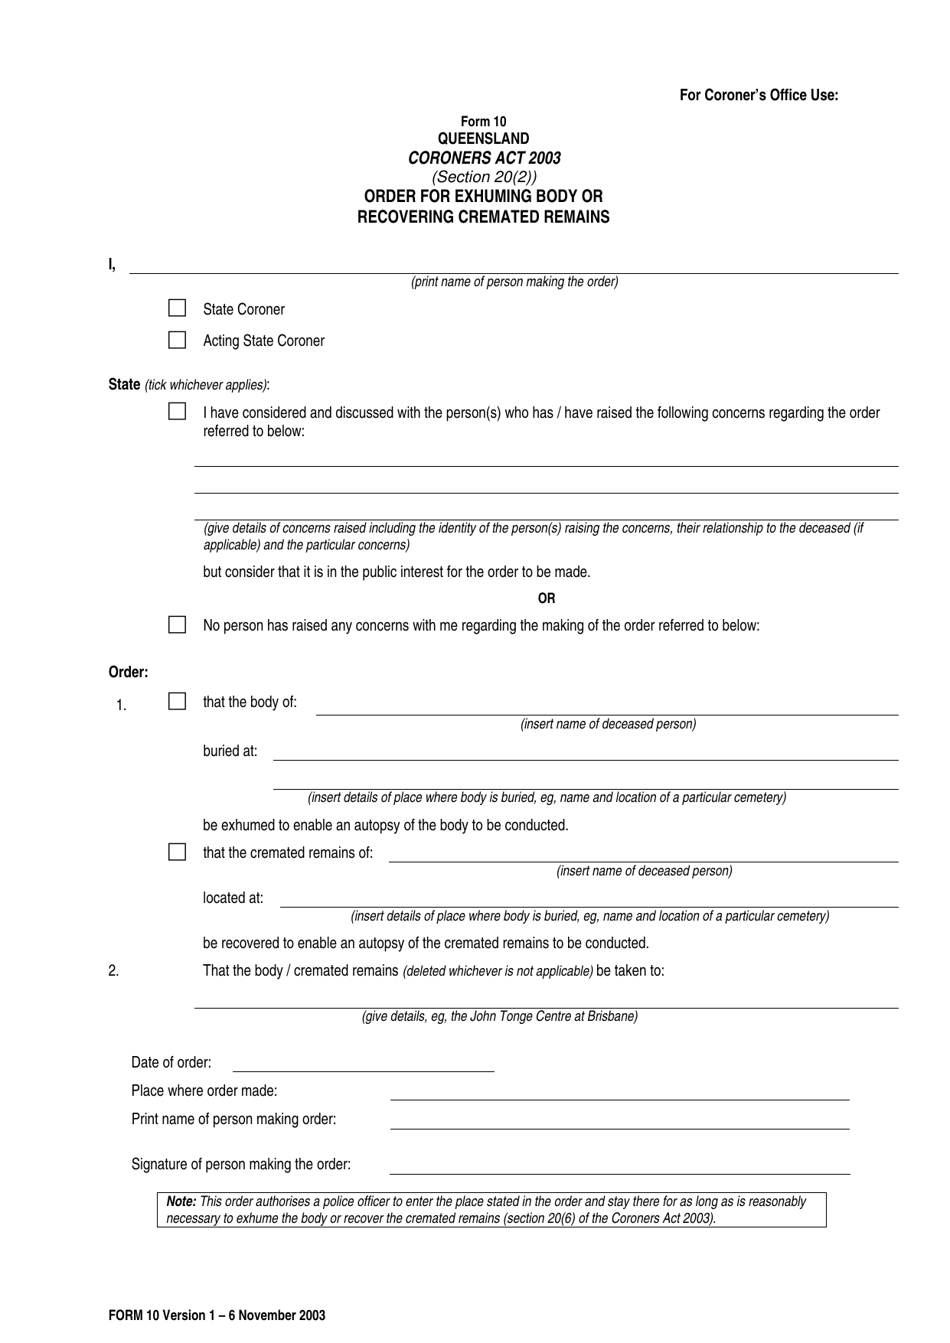 Form 10 Order for Exhuming Body or Recovering Cremated Remains - Queensland, Australia, Page 1